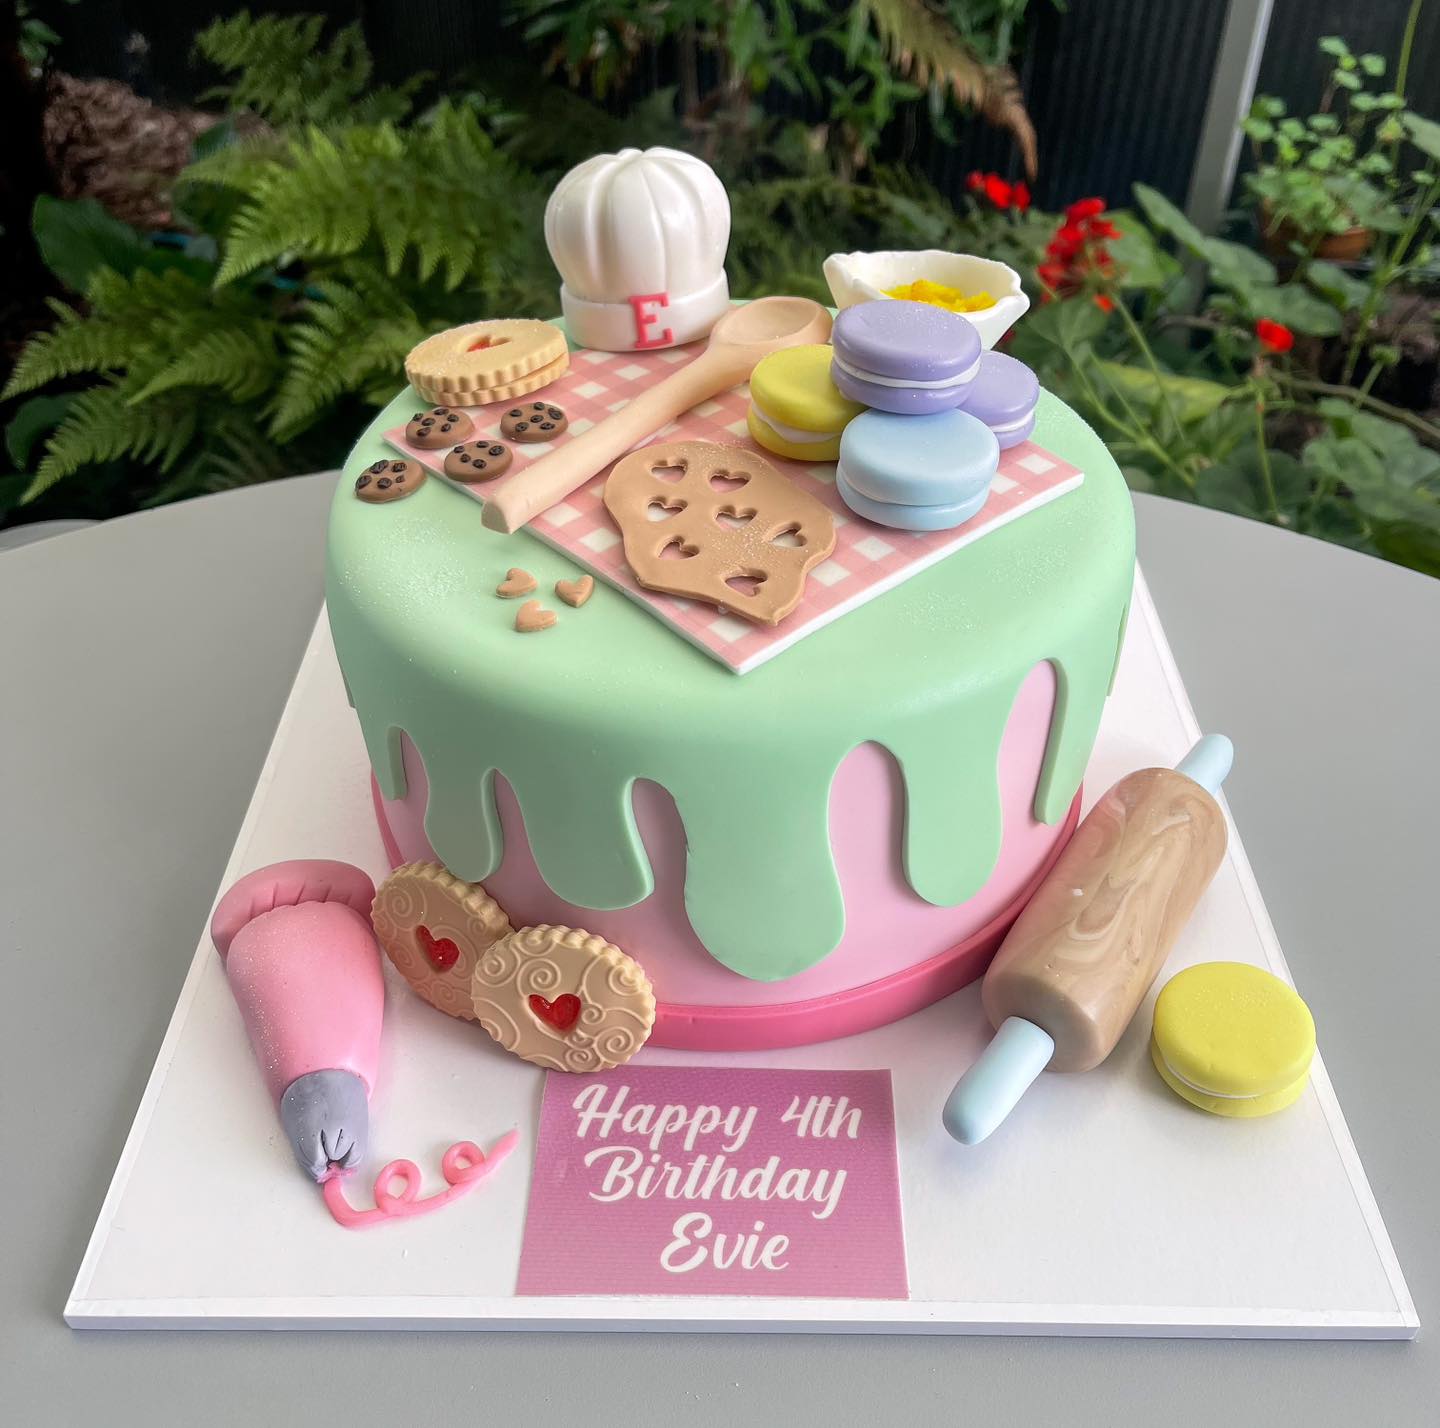 6 Best Cakes in Singapore to Celebrate Mother's Day